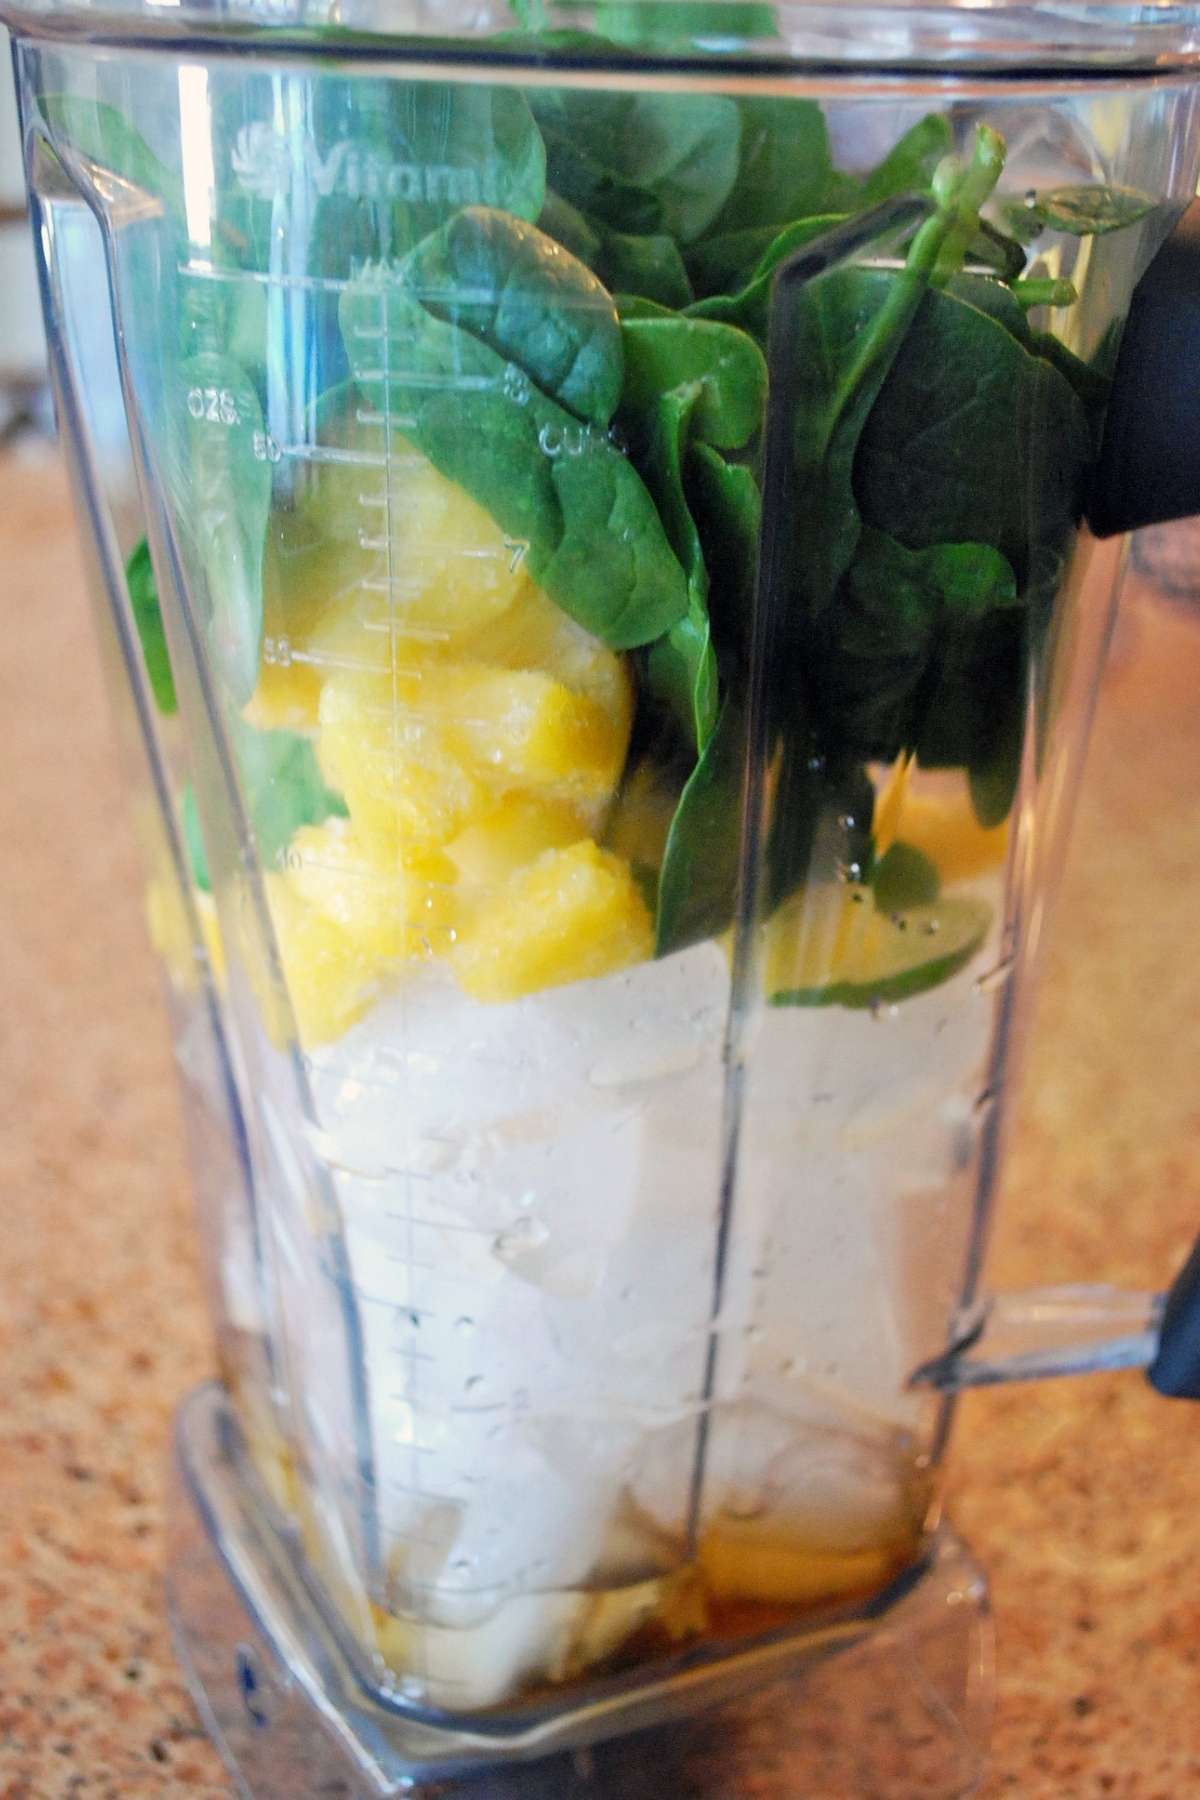 mango, spinach, and ice in a blender canister